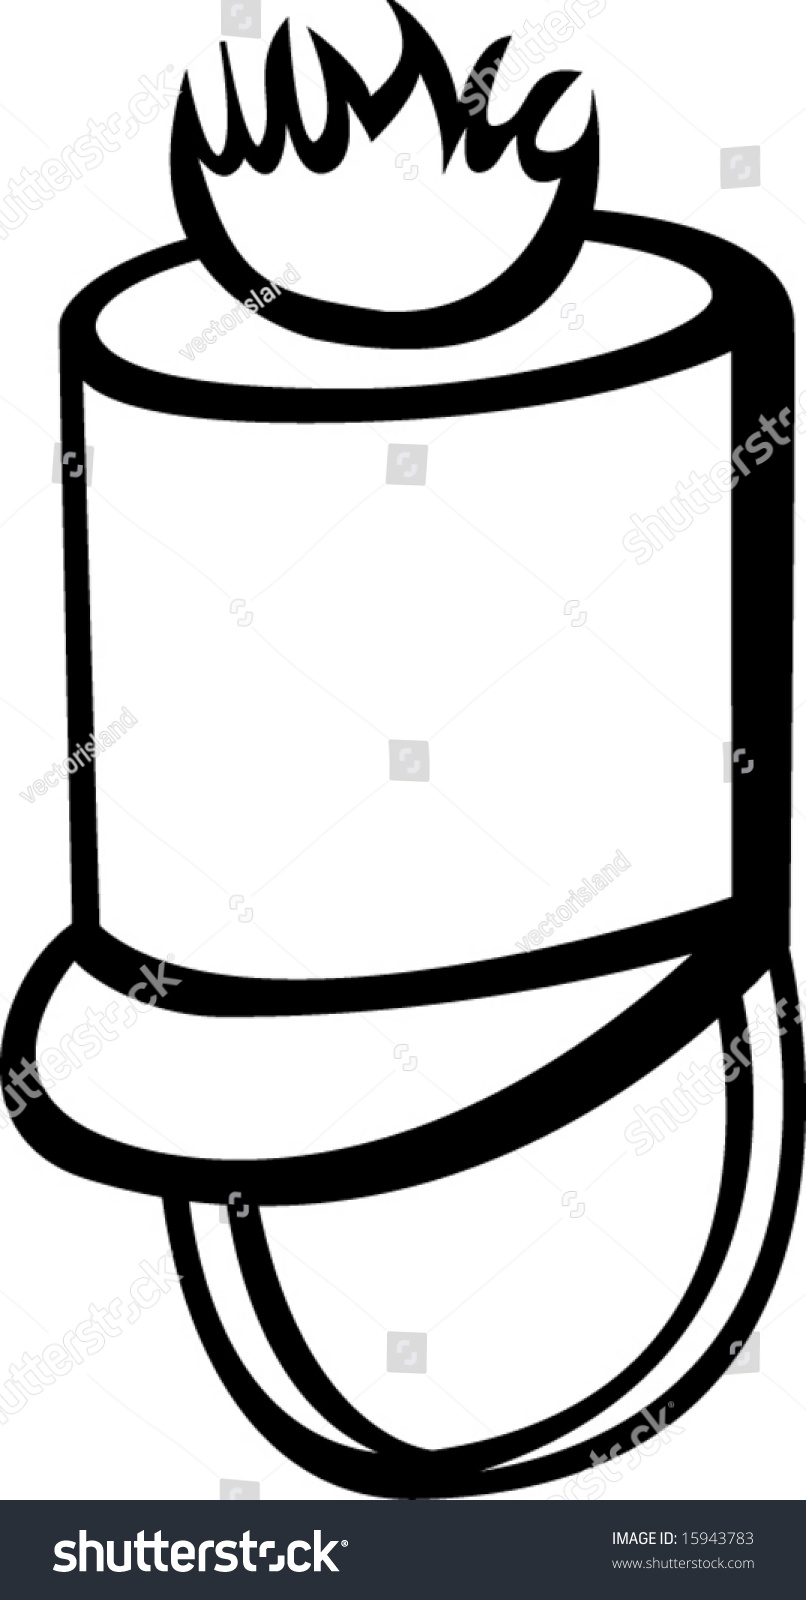 marching band hat clip art - photo #6